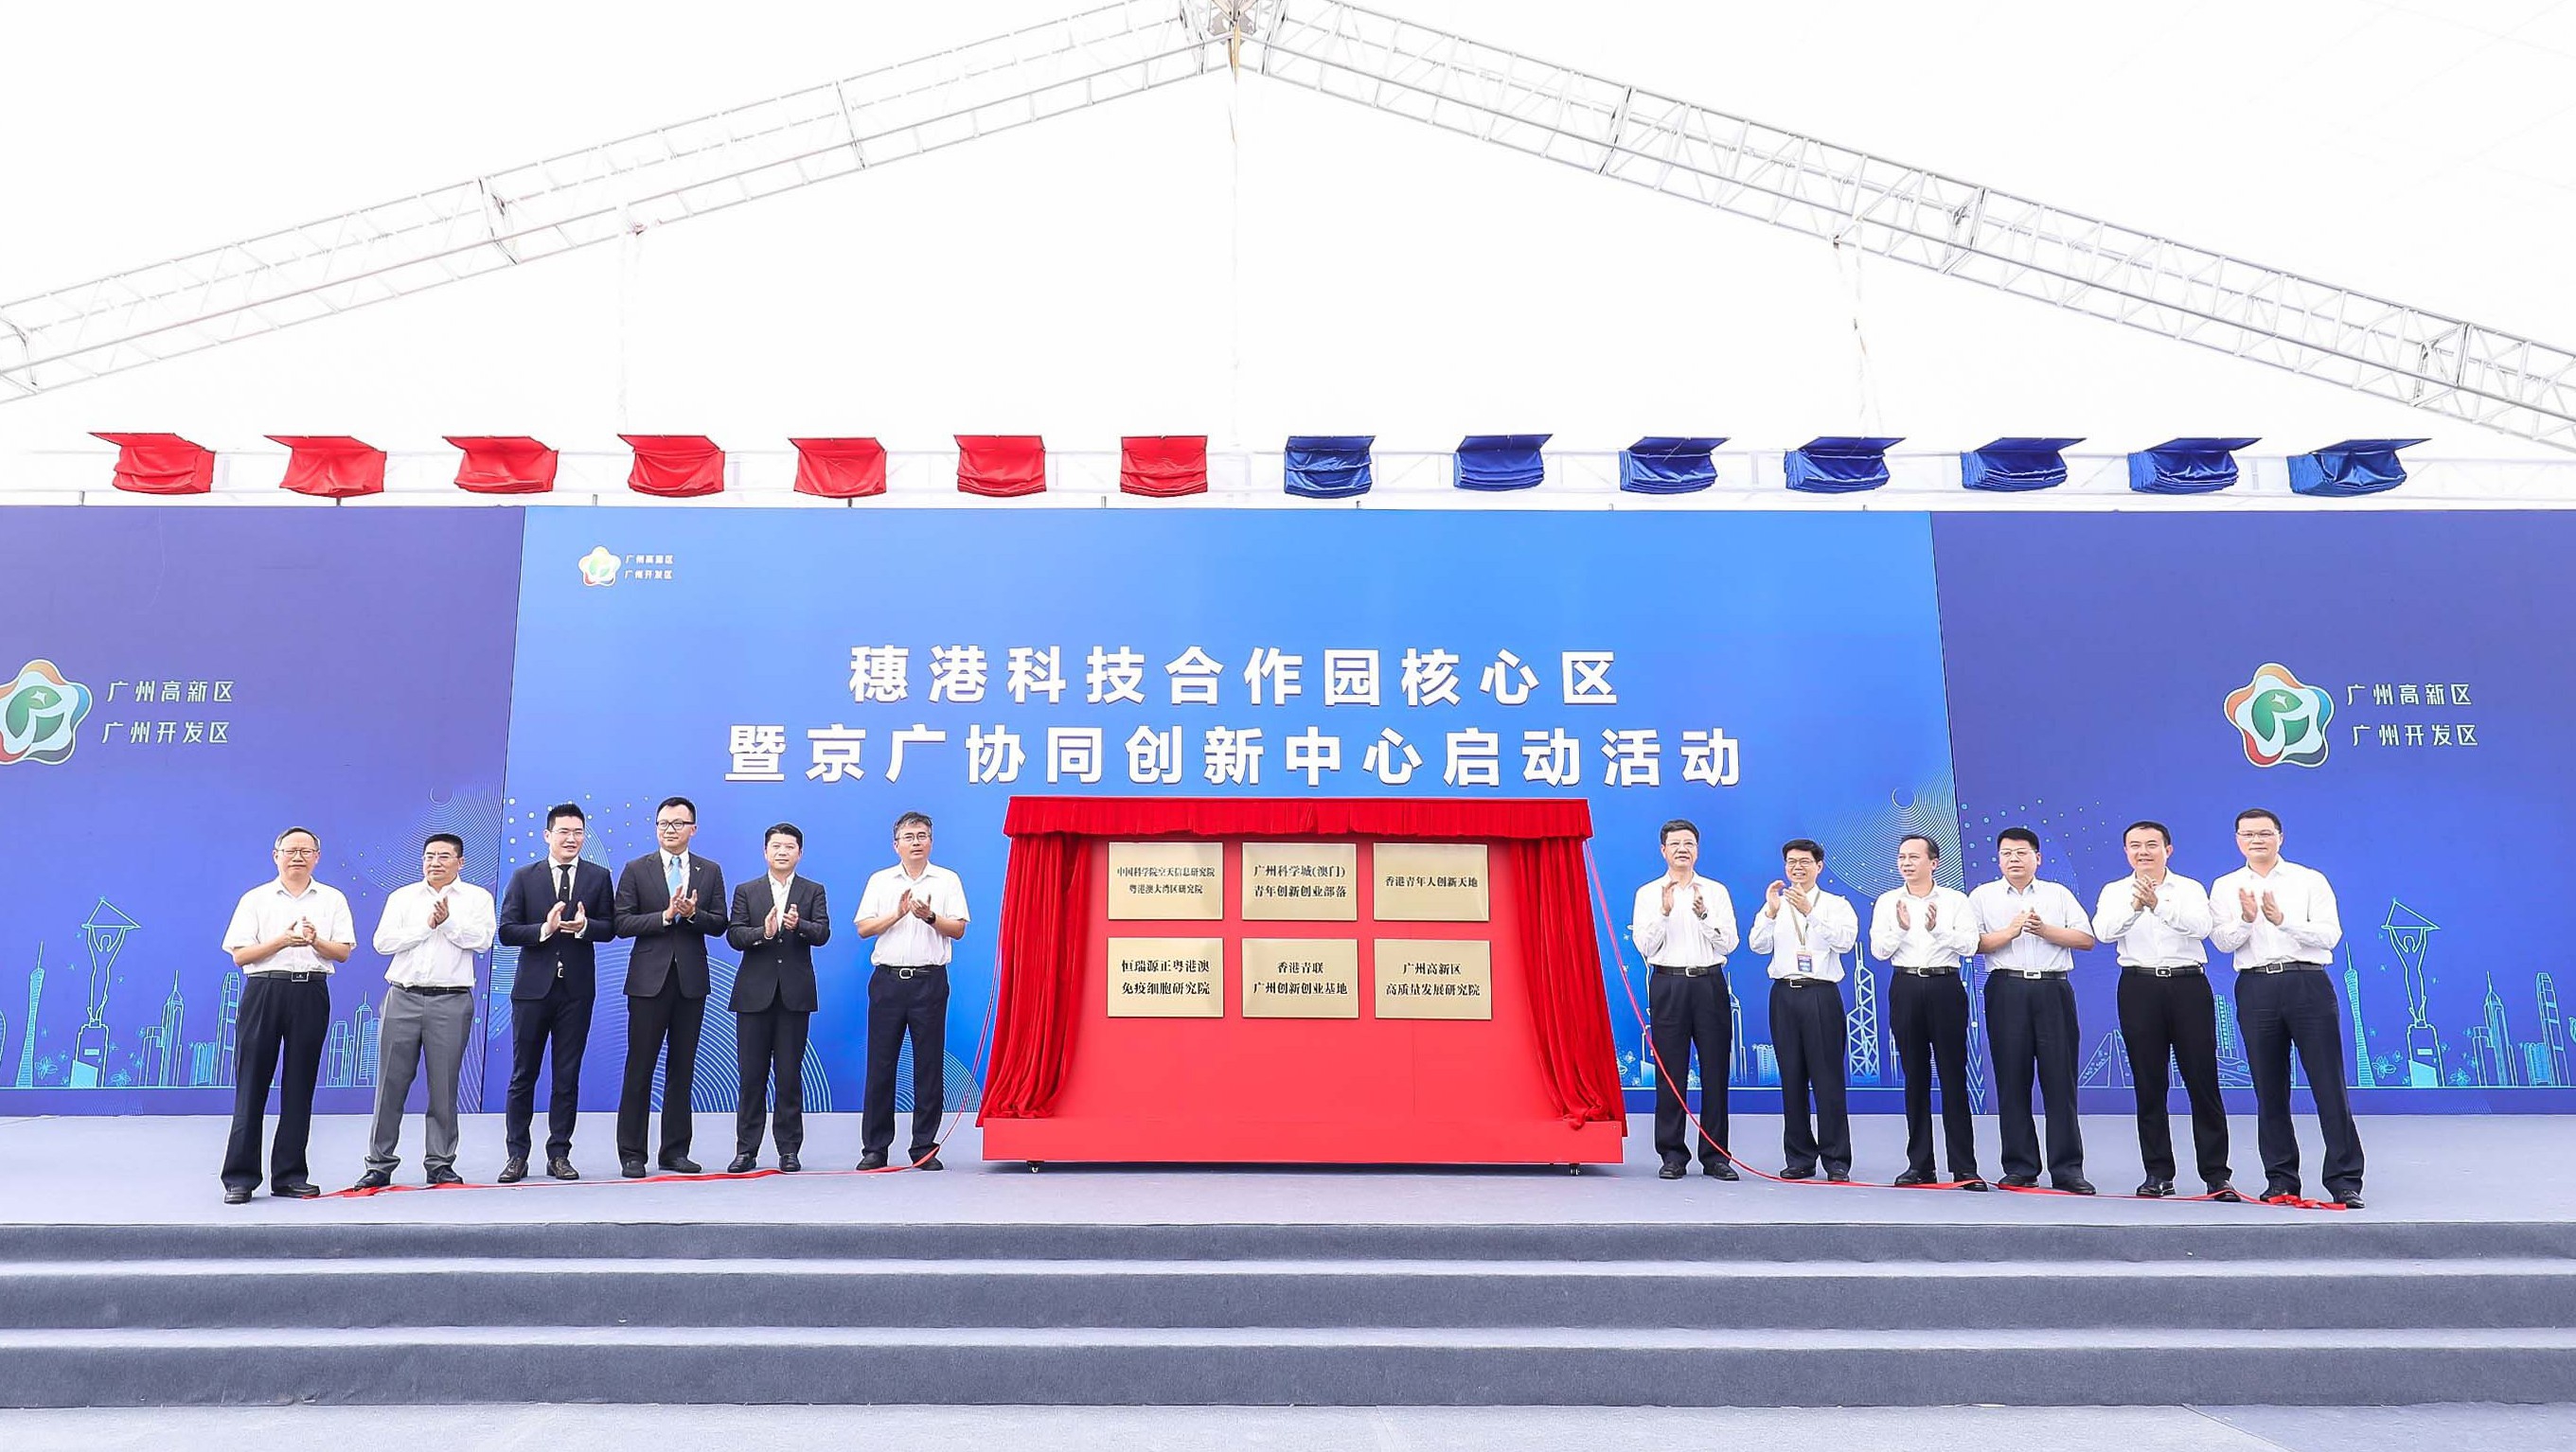 AIR Opens Greater Bay Area Terahertz Research Center in Guangzhou